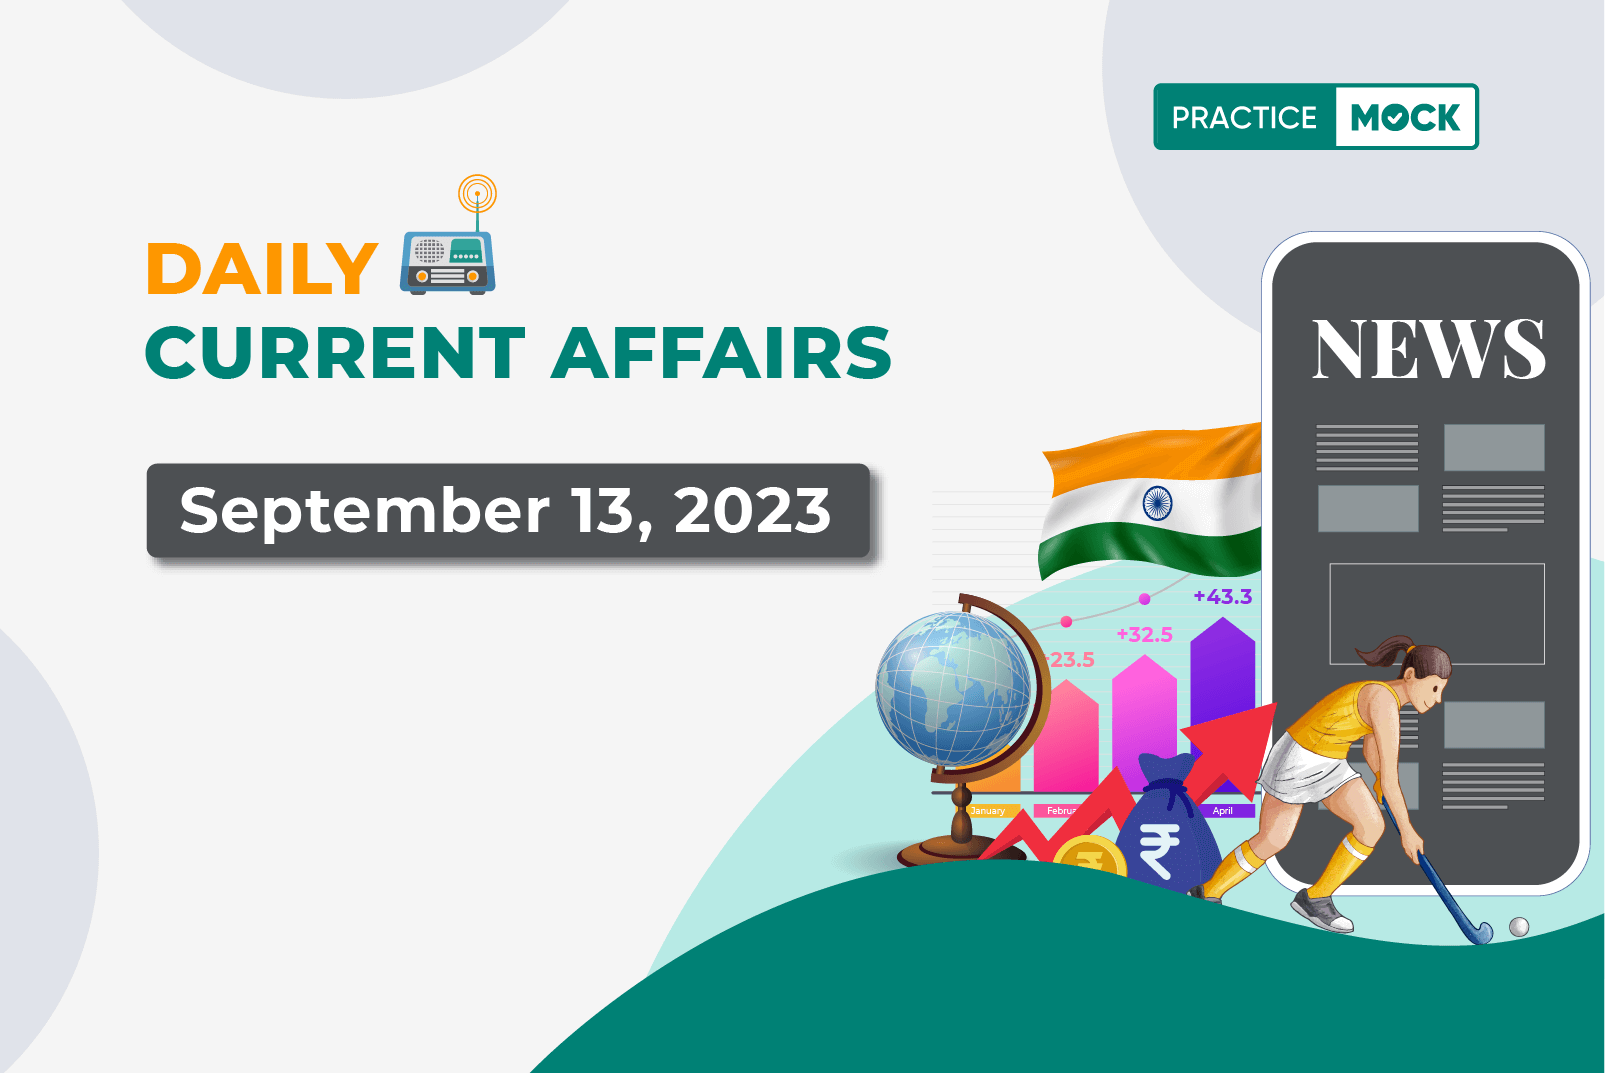 Daily Current Affairs- September 13, 2023